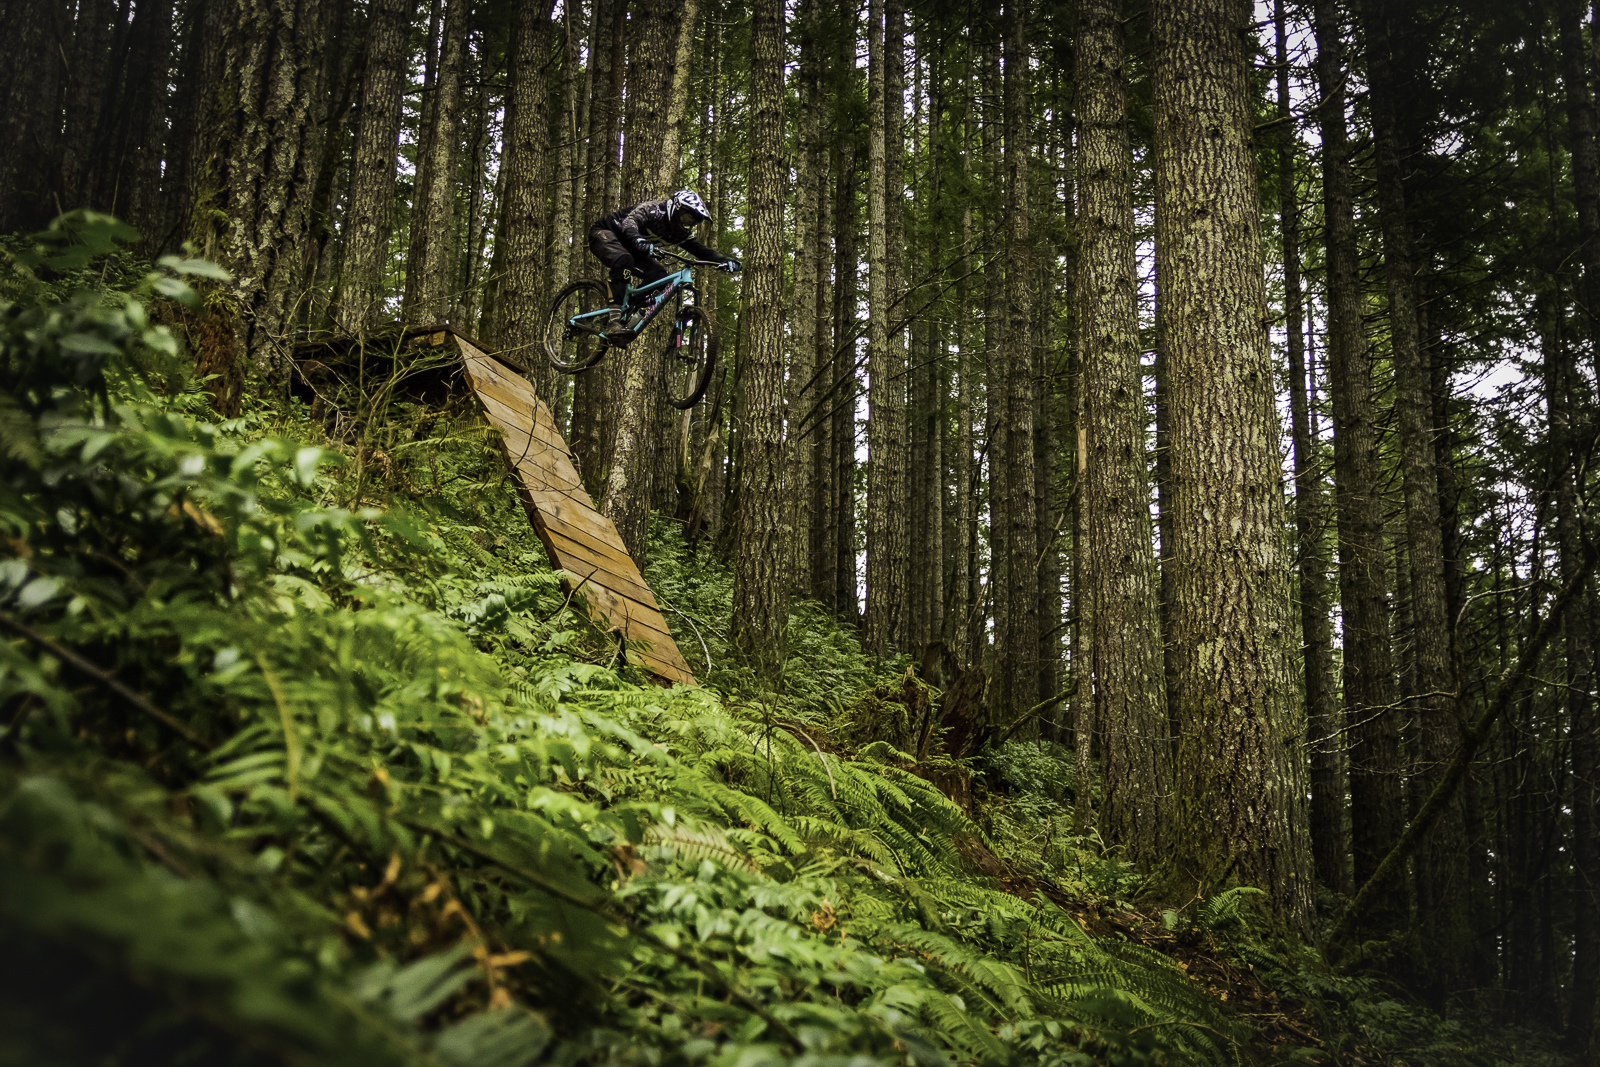 Airing out in the deep woods with Vaughn Cash.